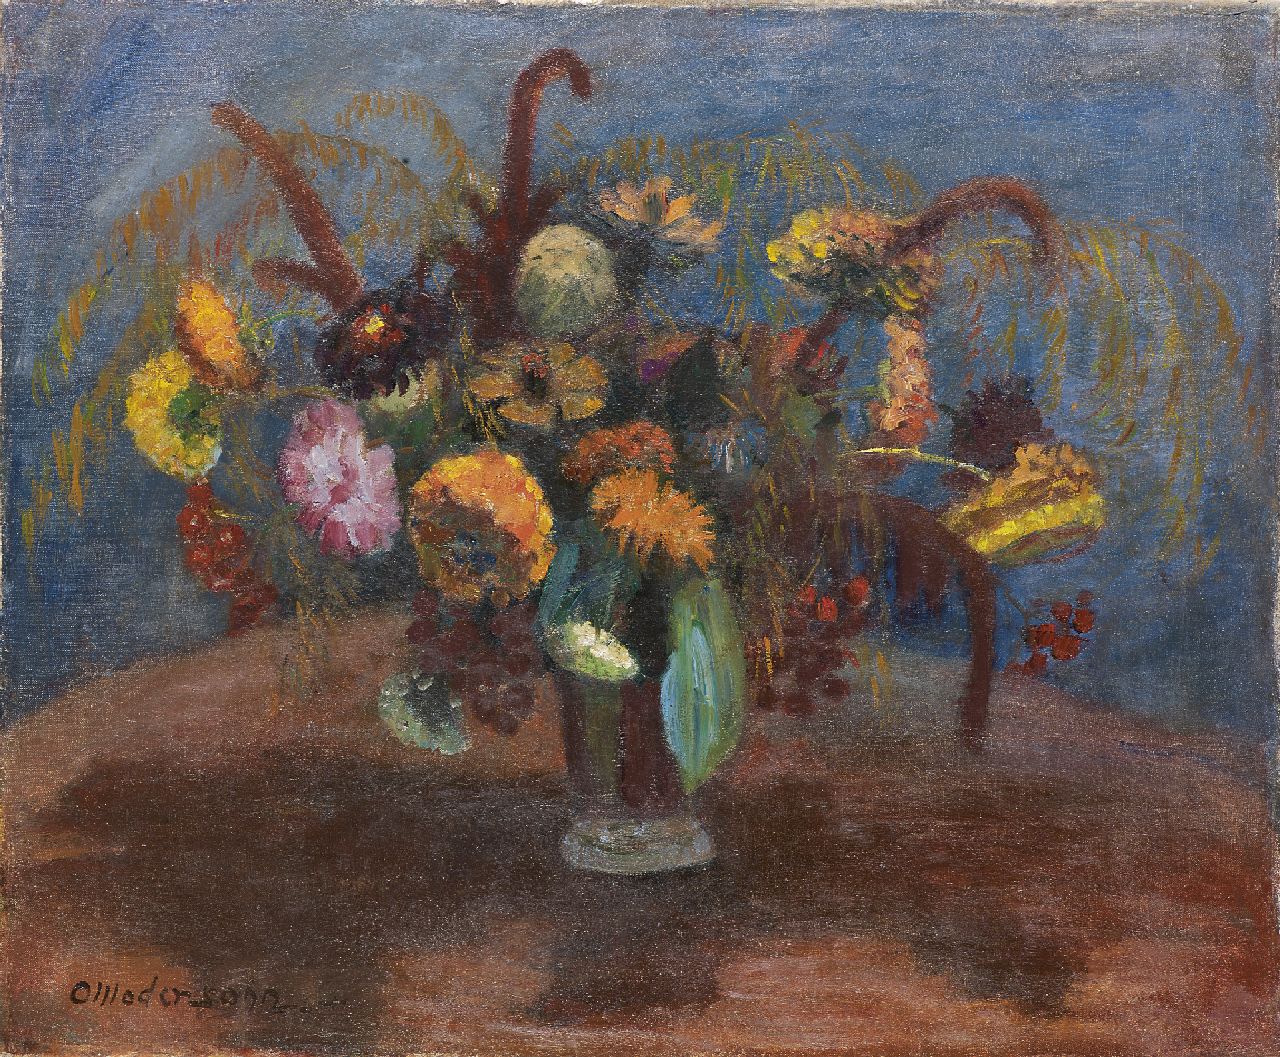 Otto Modersohn | Still life with flowers in electric light, Öl auf Leinwand, 50,9 x 61,2 cm, signed l.l. und dated '36